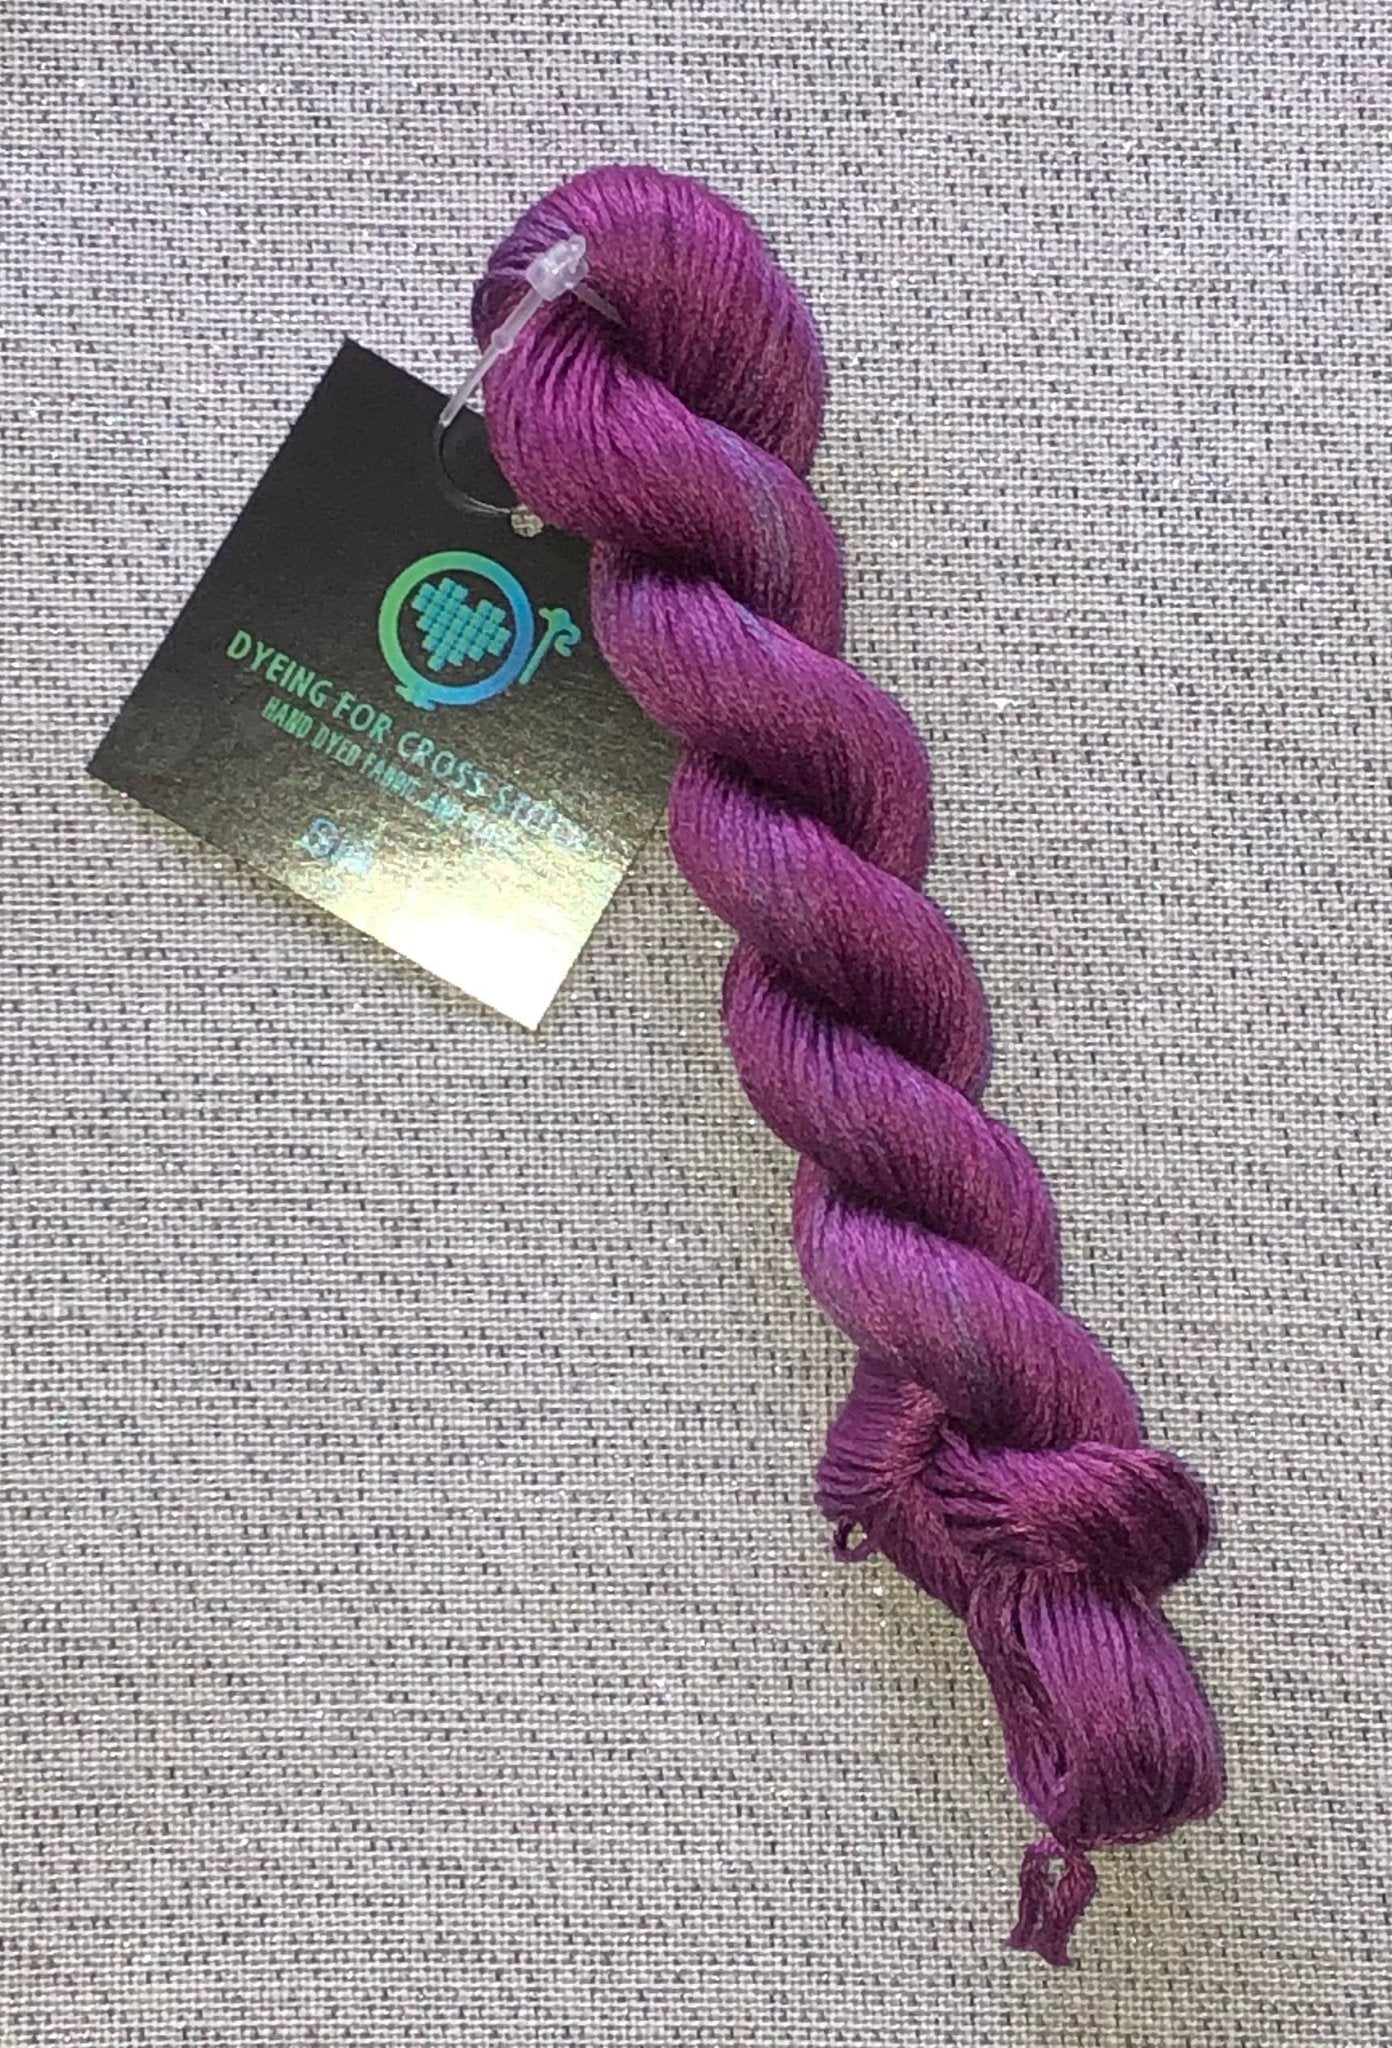 Silk hand dyed floss - Concord - Dyeing for Cross Stitch